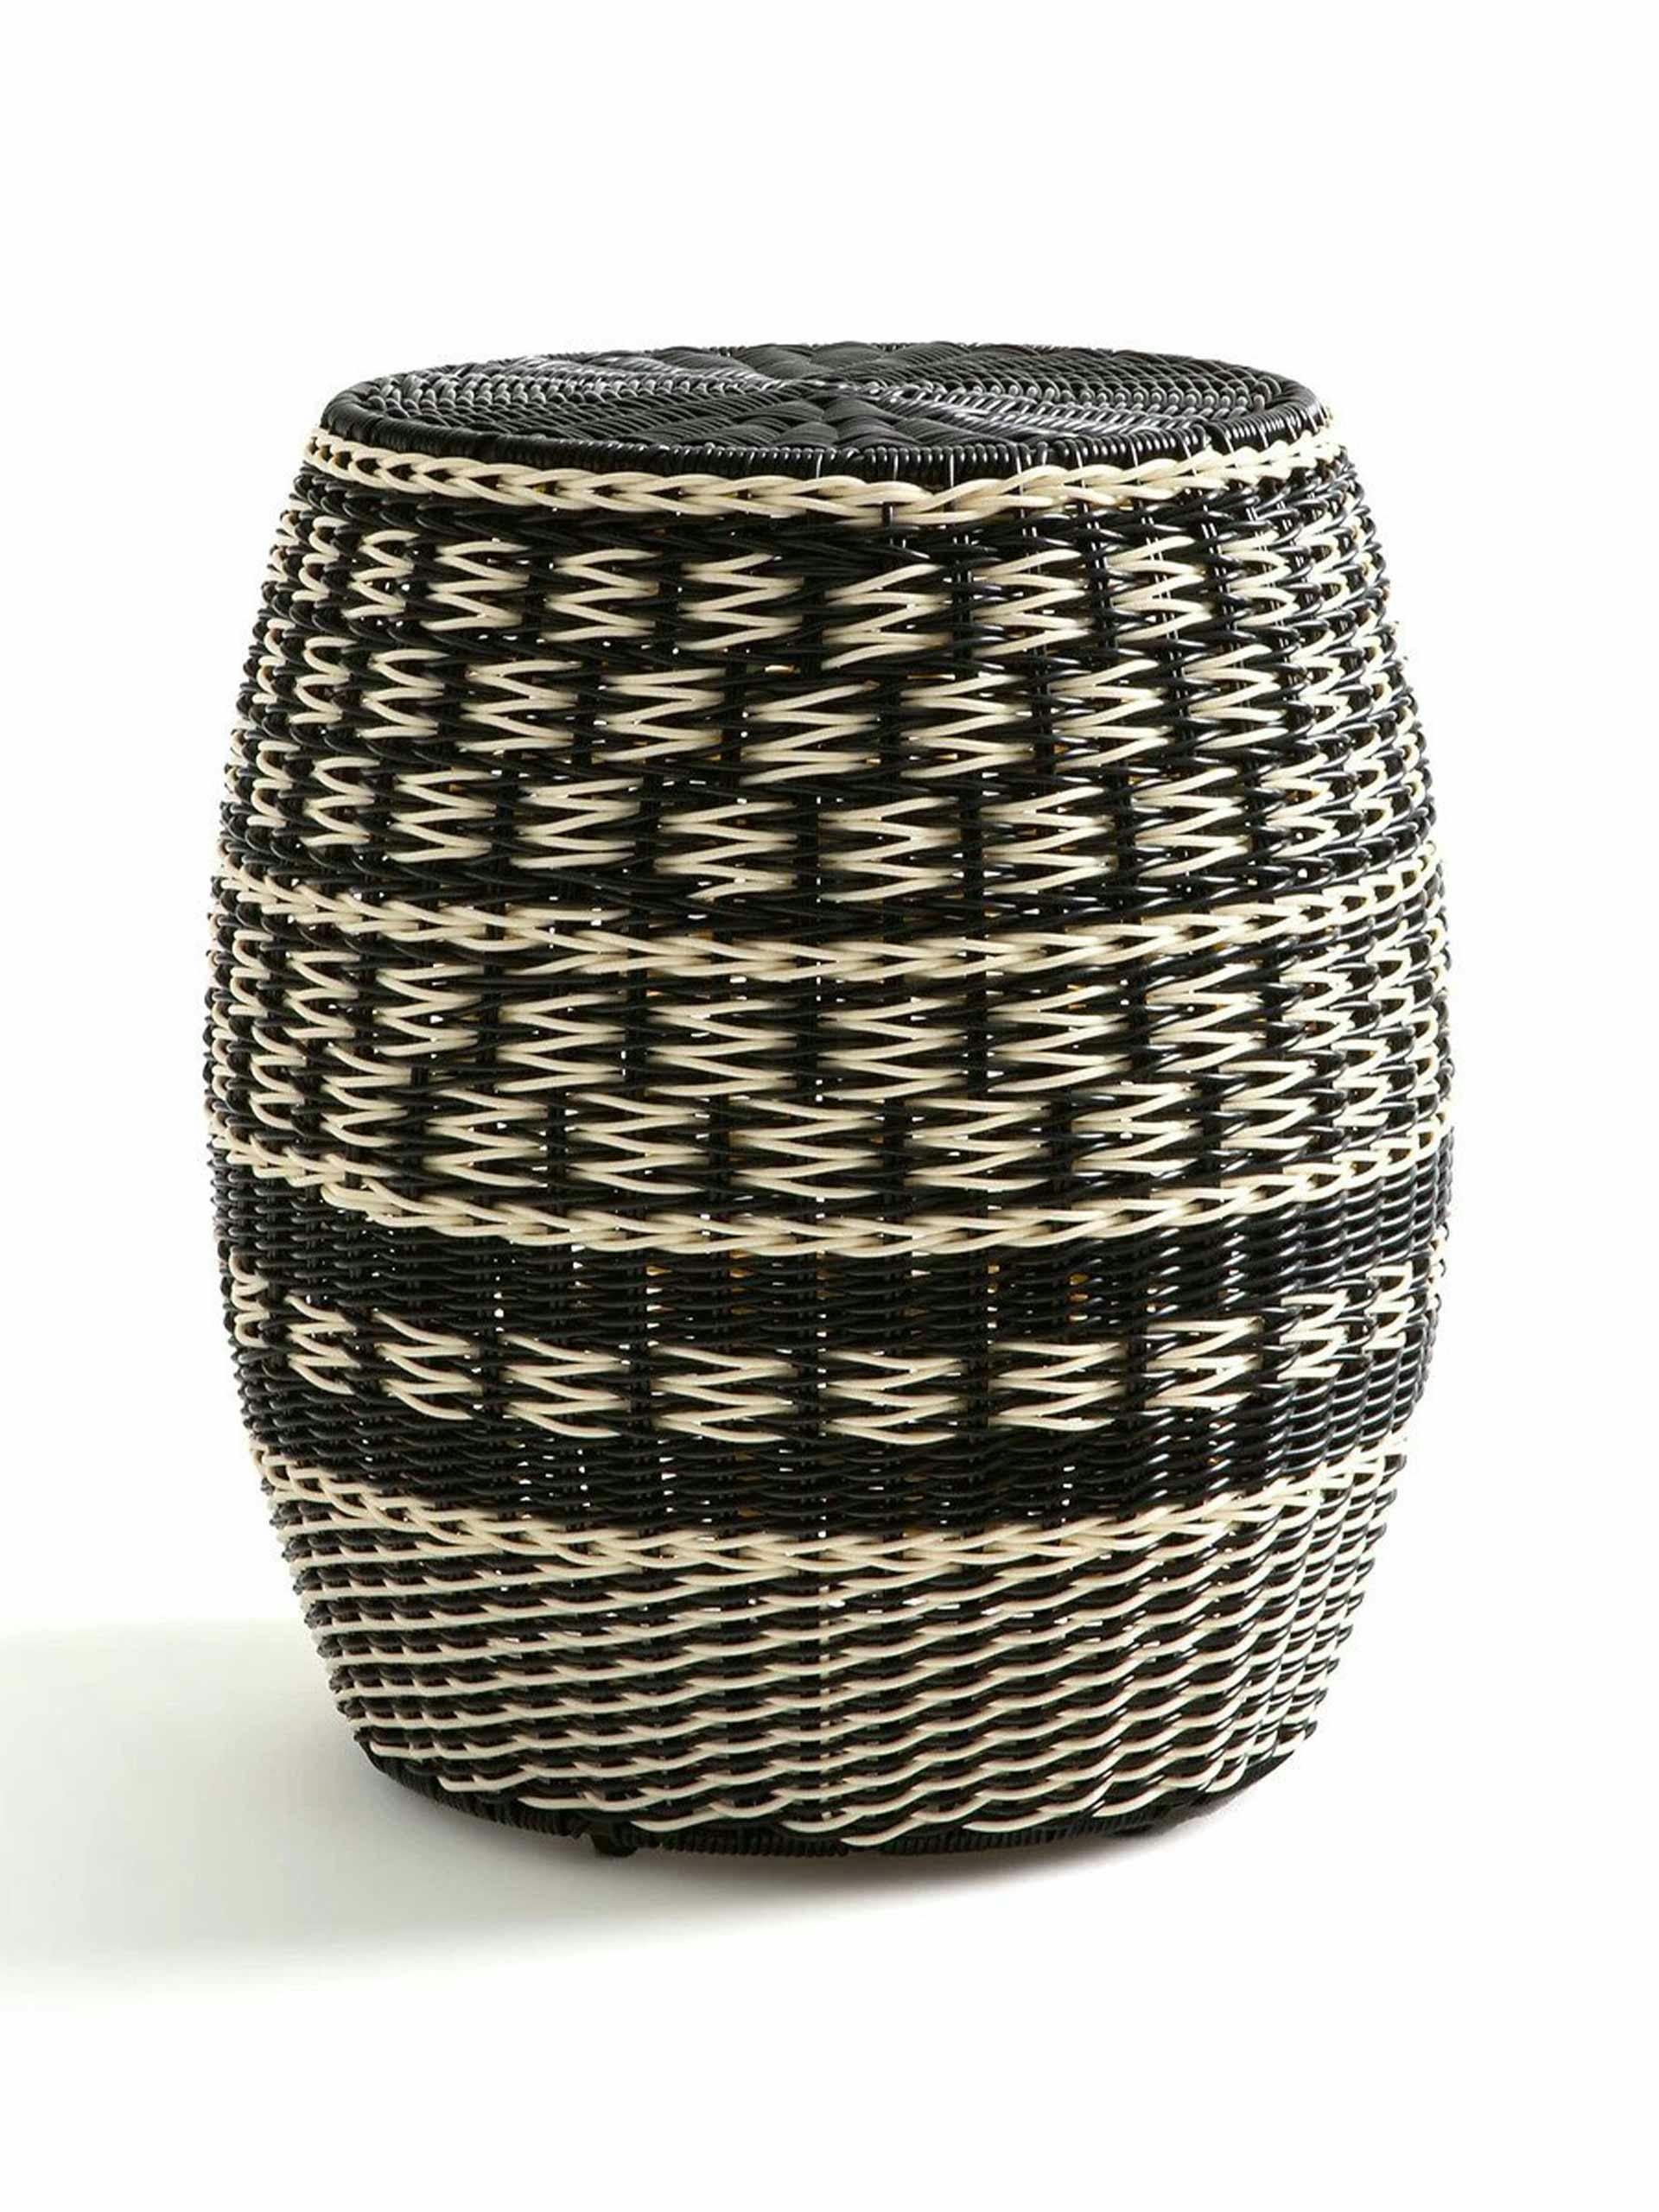 Ecru and black outdoor side table